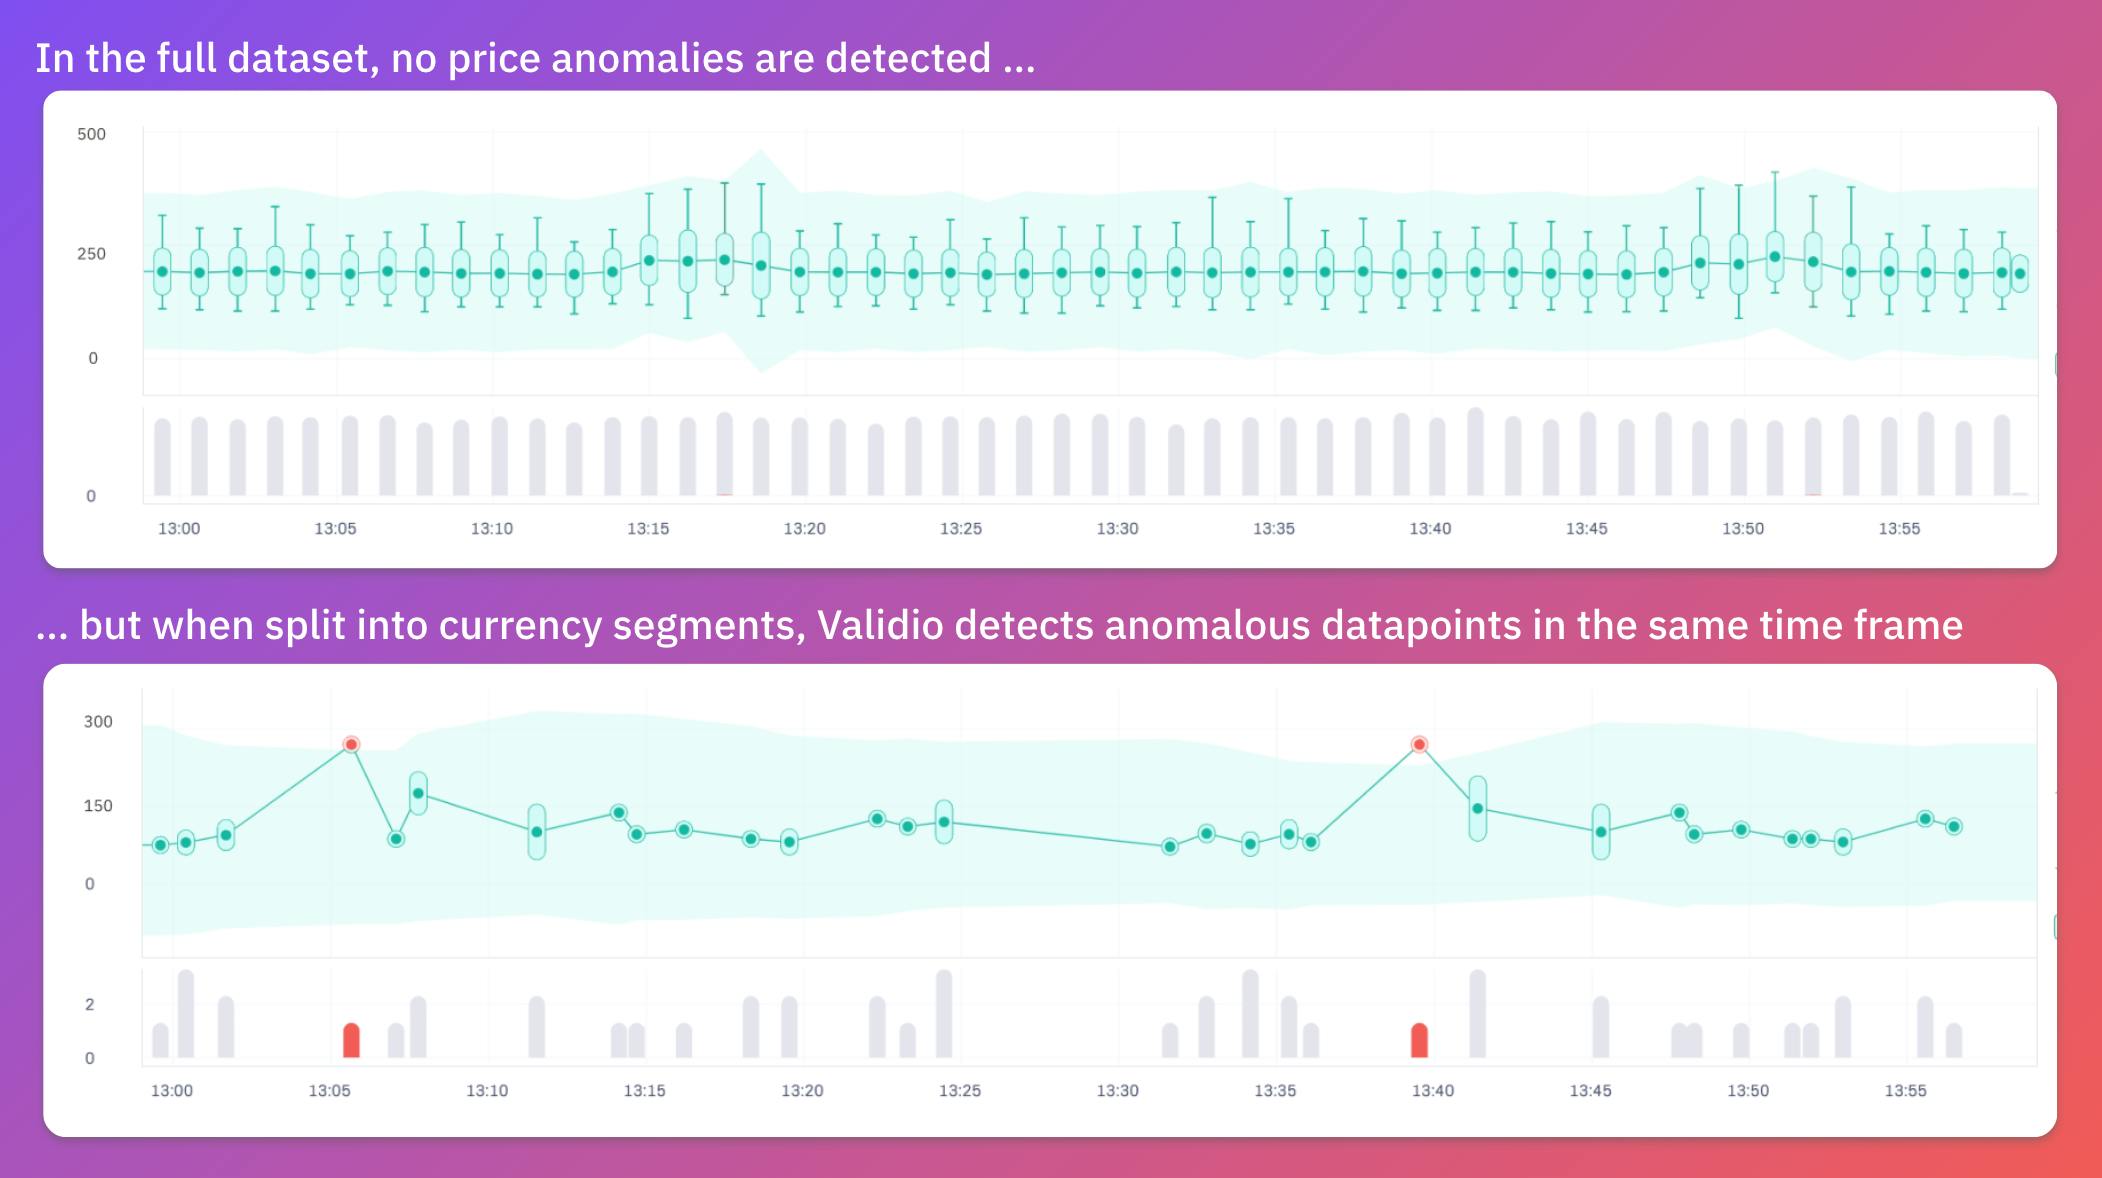 By splitting price into currency segments, Validio detects two anomalies in the DKK segment while the same datapoints are considered normal range values in the complete set. Julia investigates the datapoints and discovers they were attributed incorrect currencies.